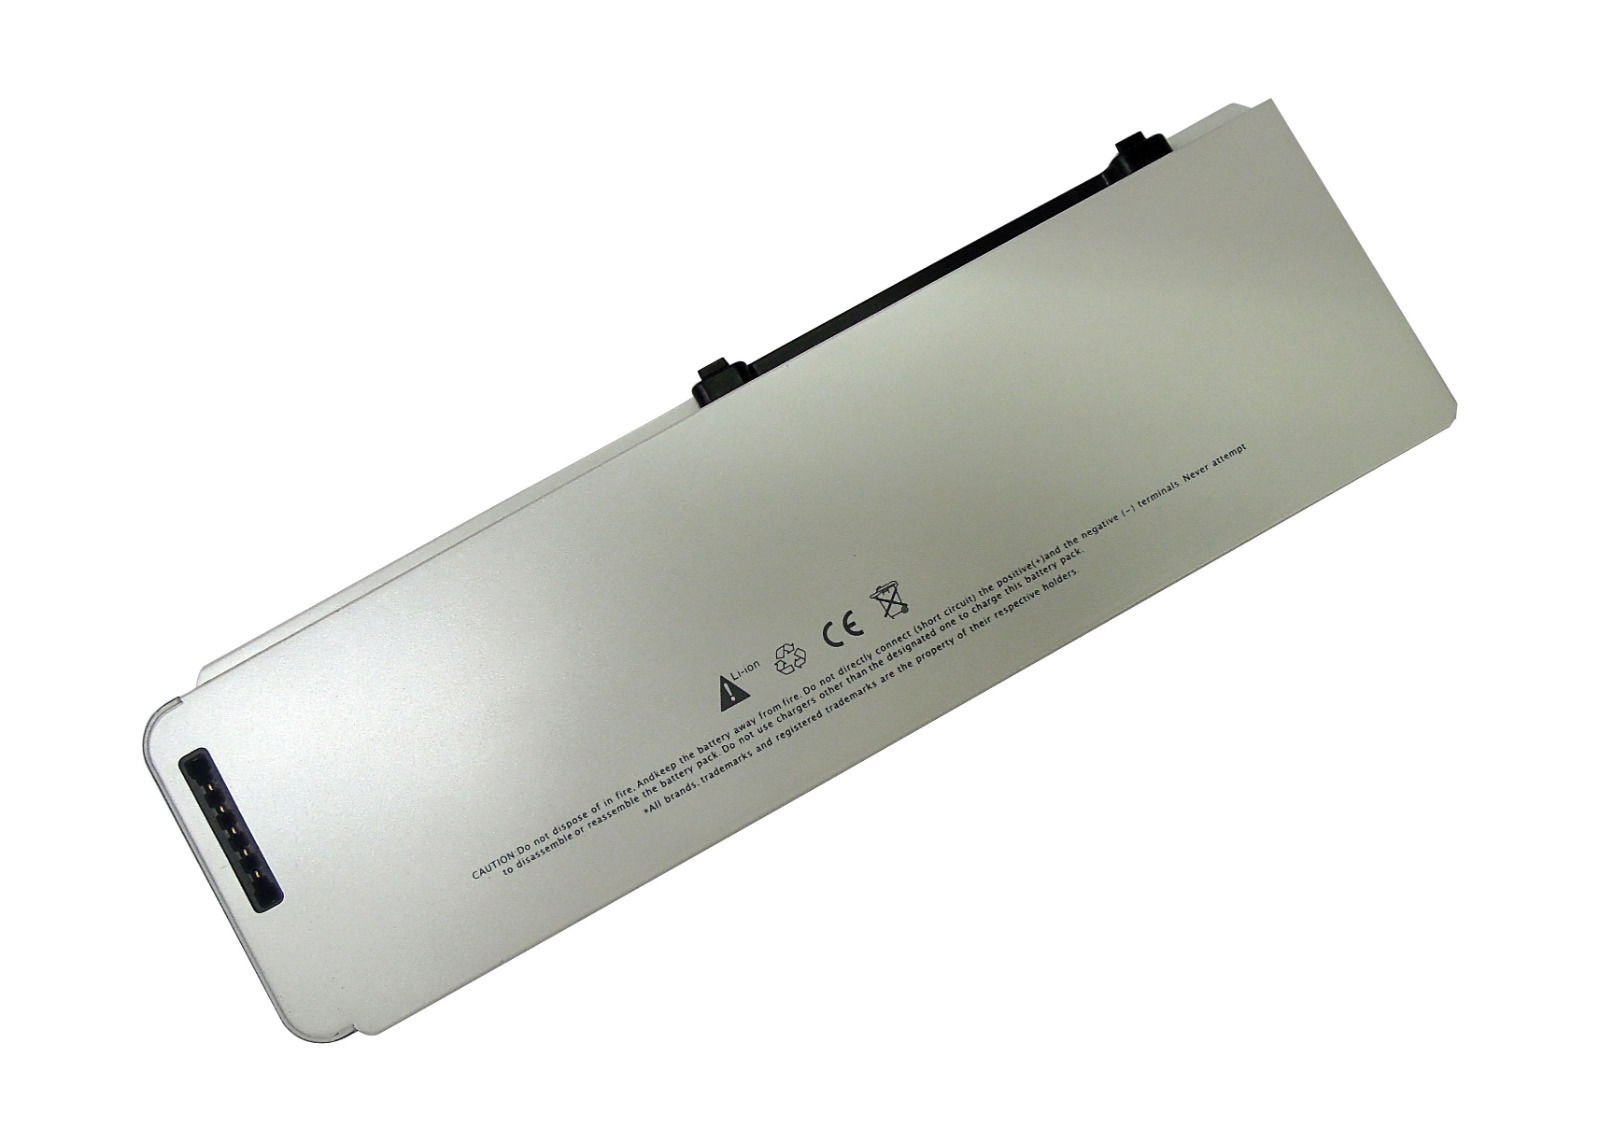 macbook late 2009 battery replacement